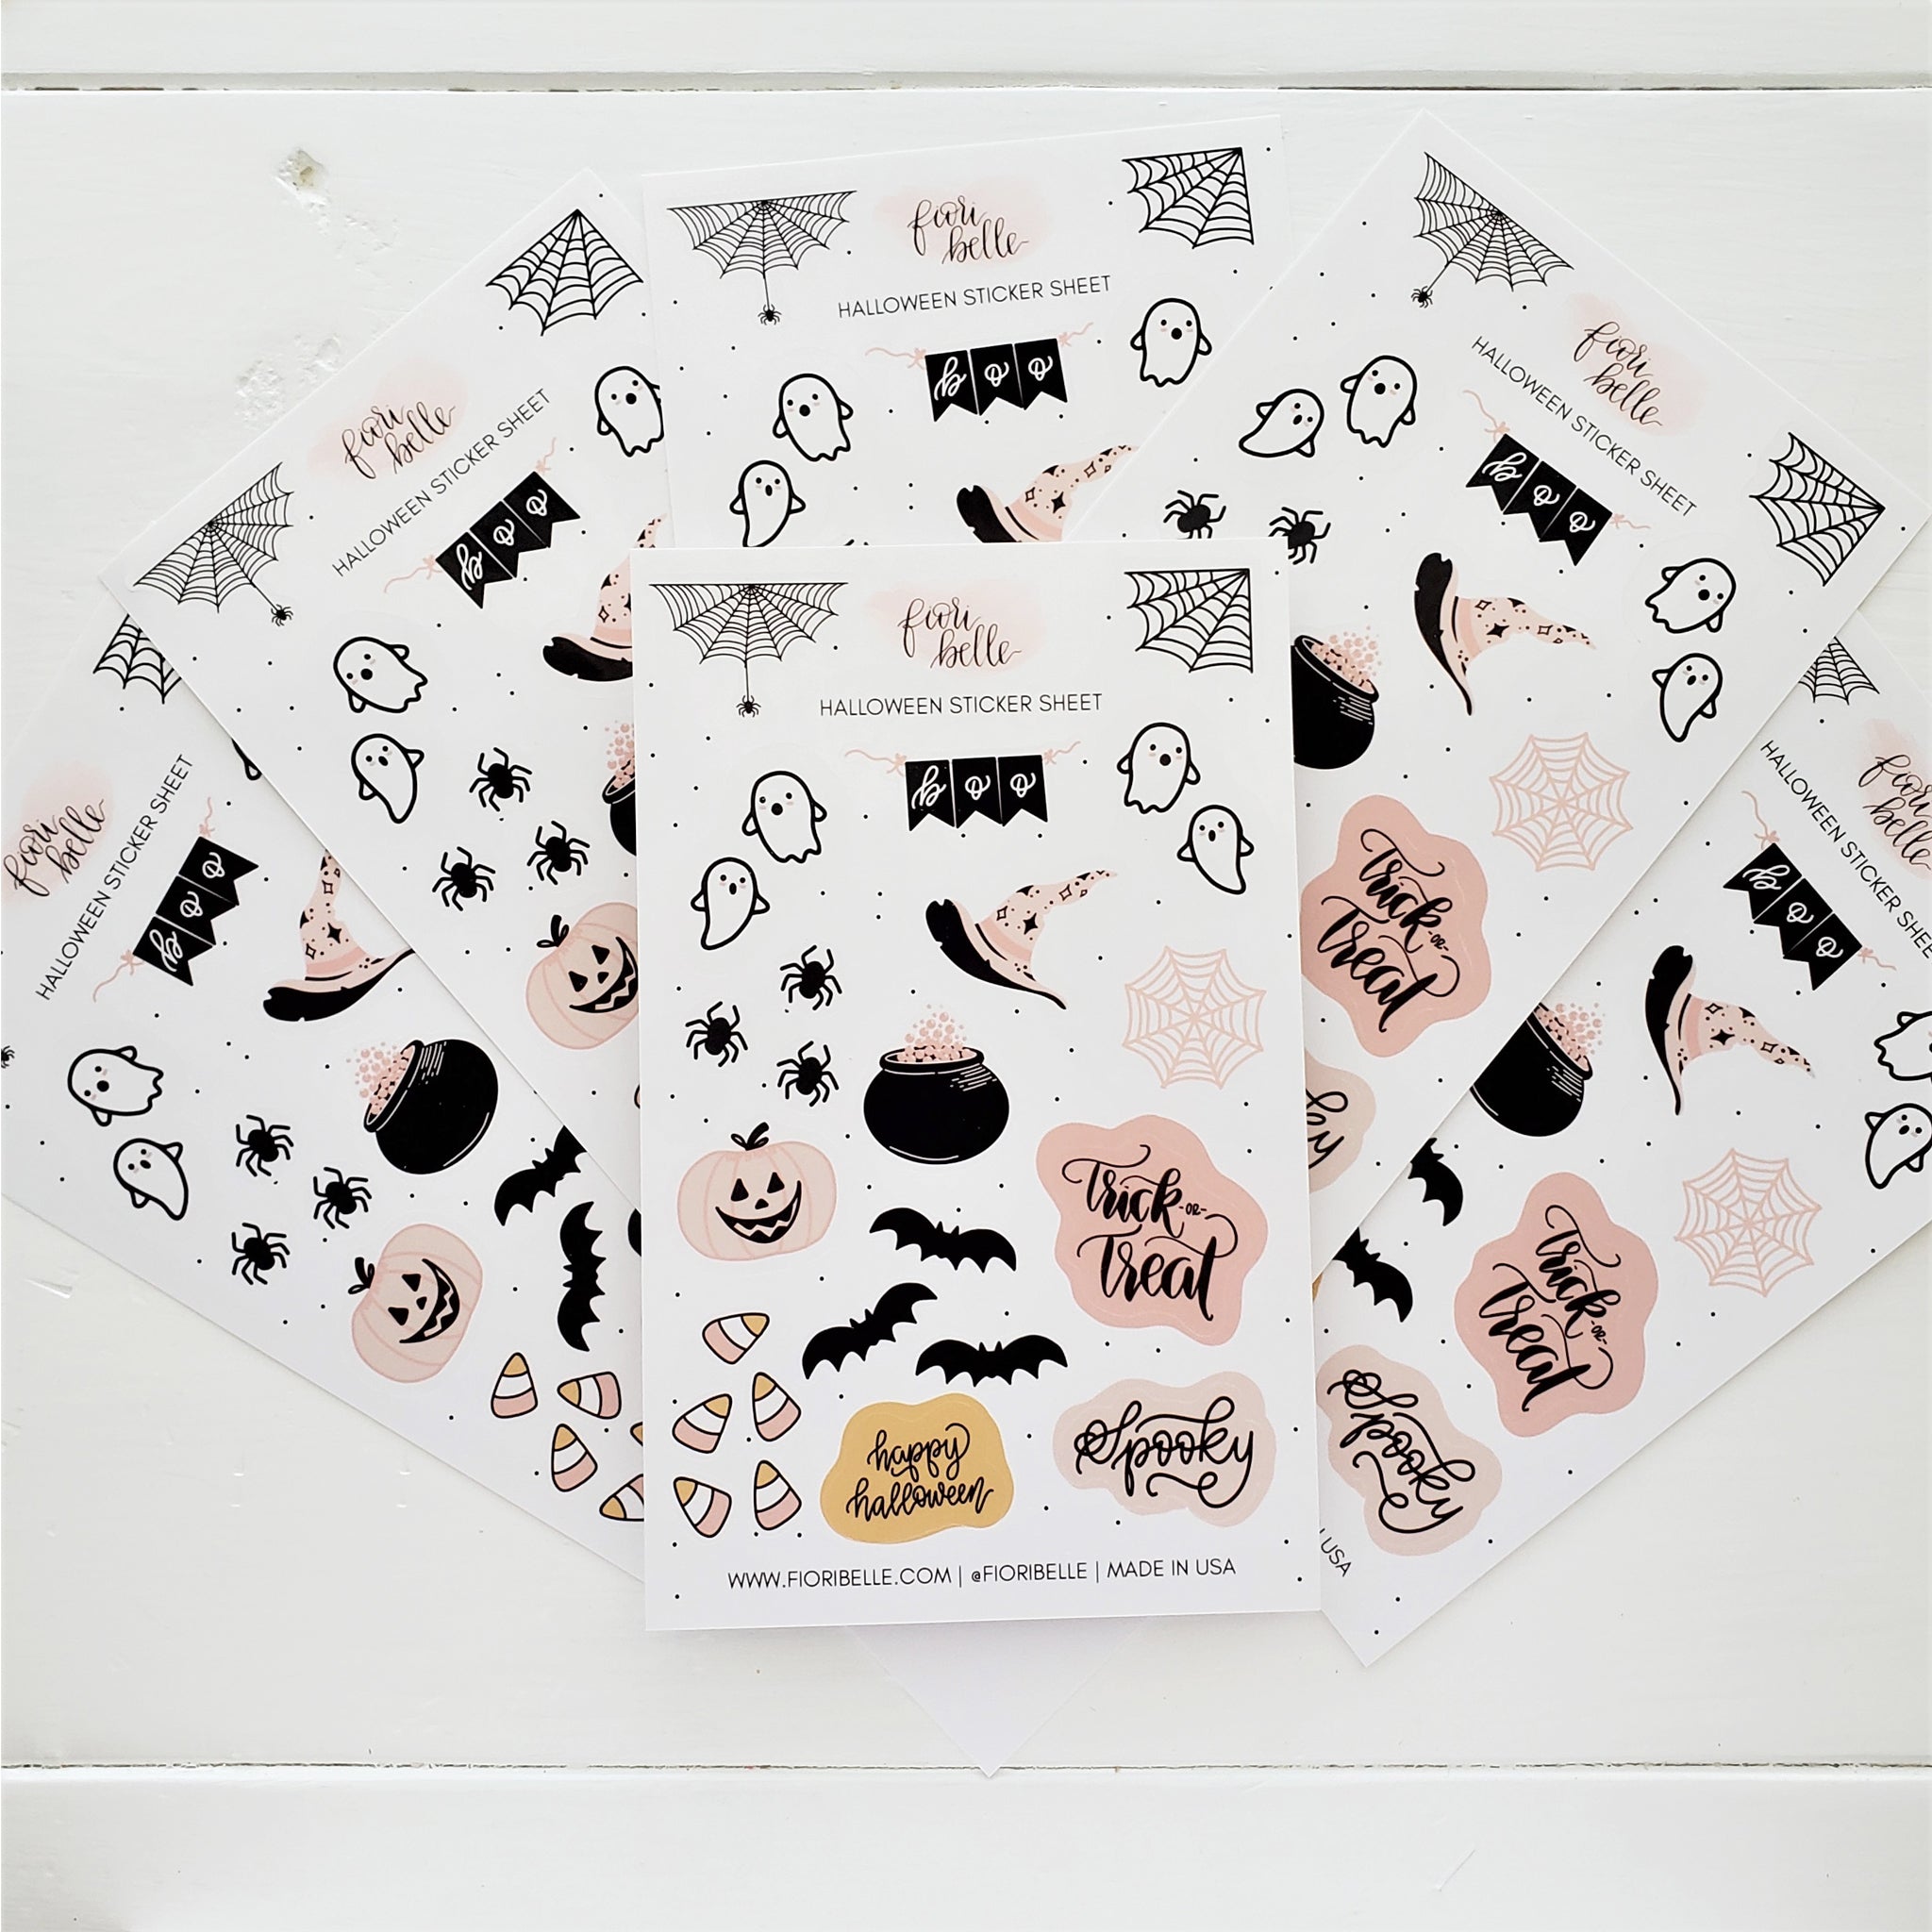 "Halloween Sticker Sheet featuring 23 glossy vinyl stickers including cute ghosts, spiders, and candy corn, hand-written halloween phrases, a witch cauldron & hat,  displayed on a pastel background. Great for personalizing planners, laptops, and water bottles.